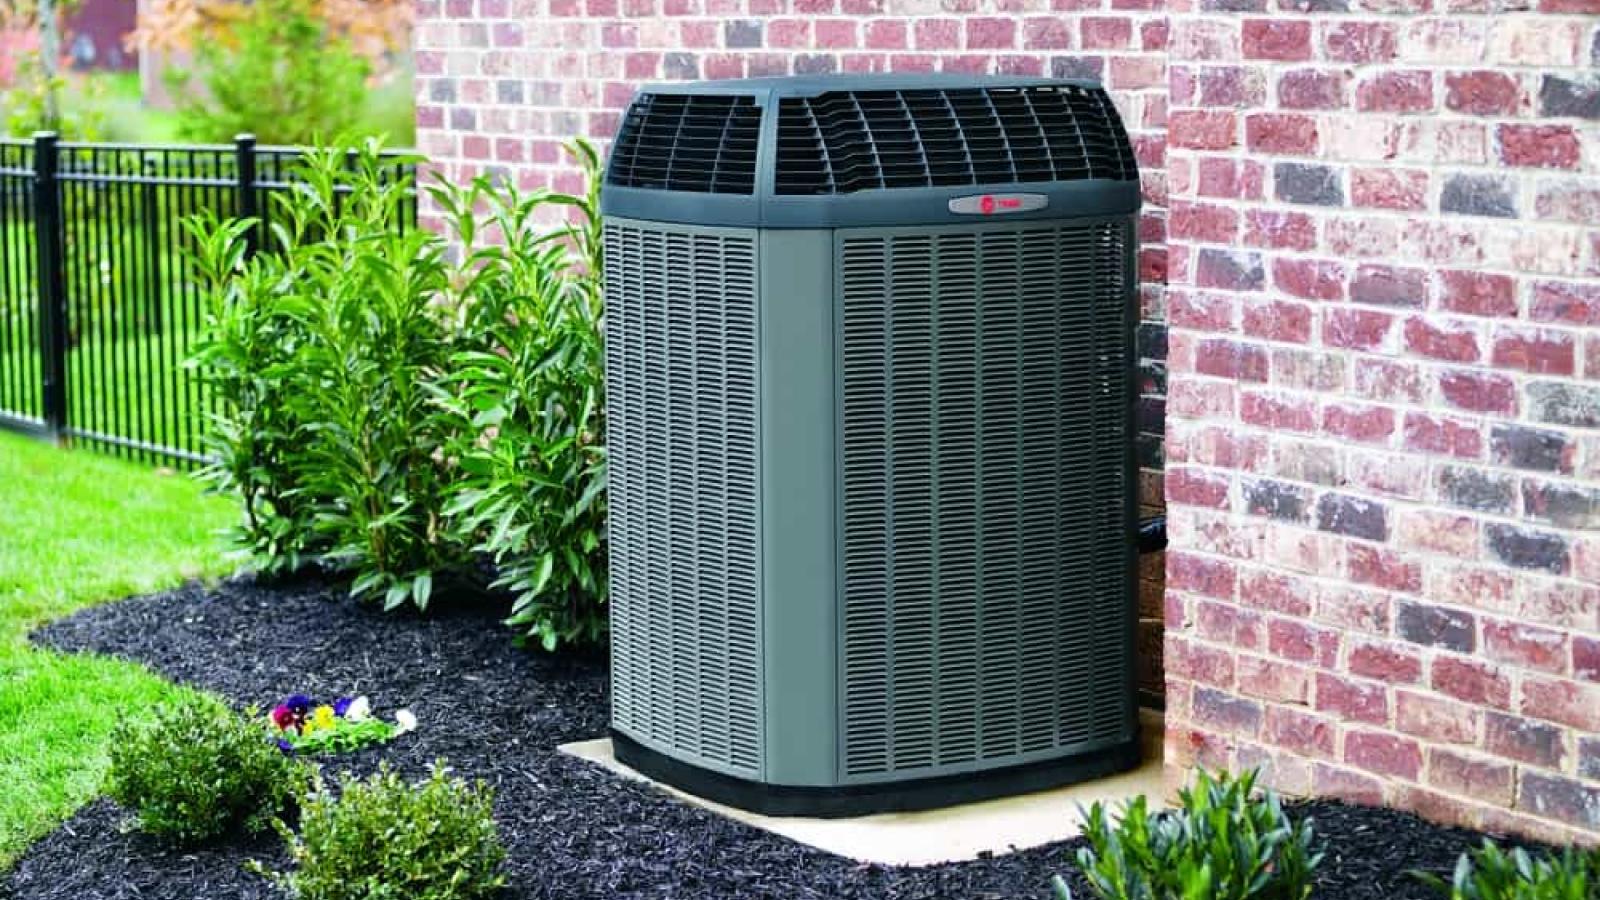 A Trane air conditioner surrounded by landscaping.